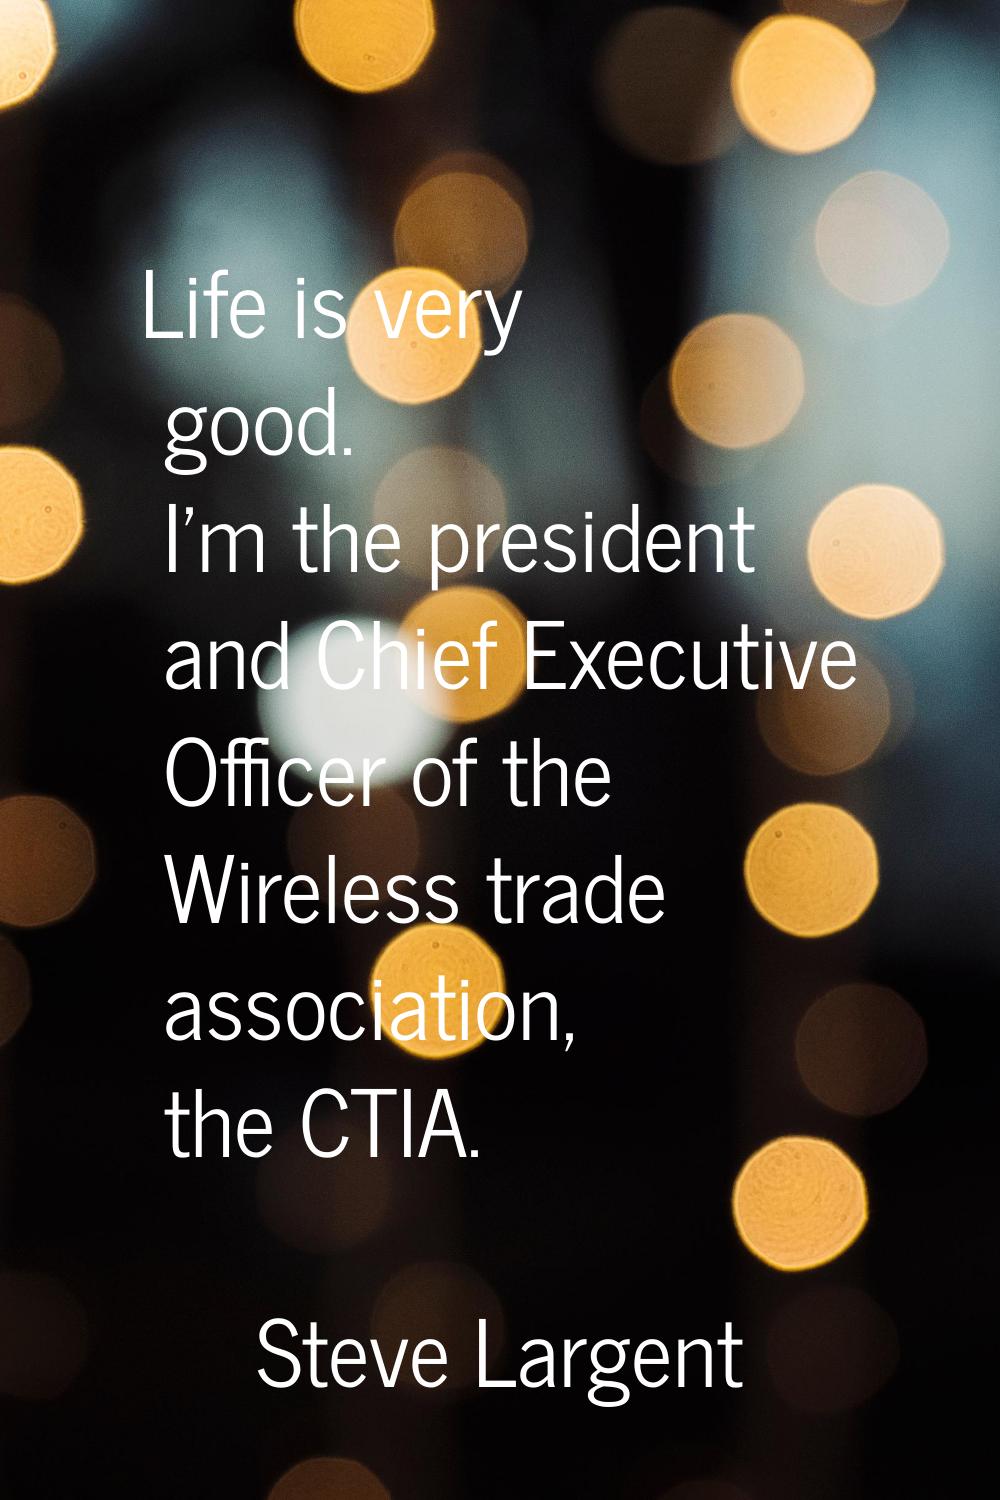 Life is very good. I'm the president and Chief Executive Officer of the Wireless trade association,